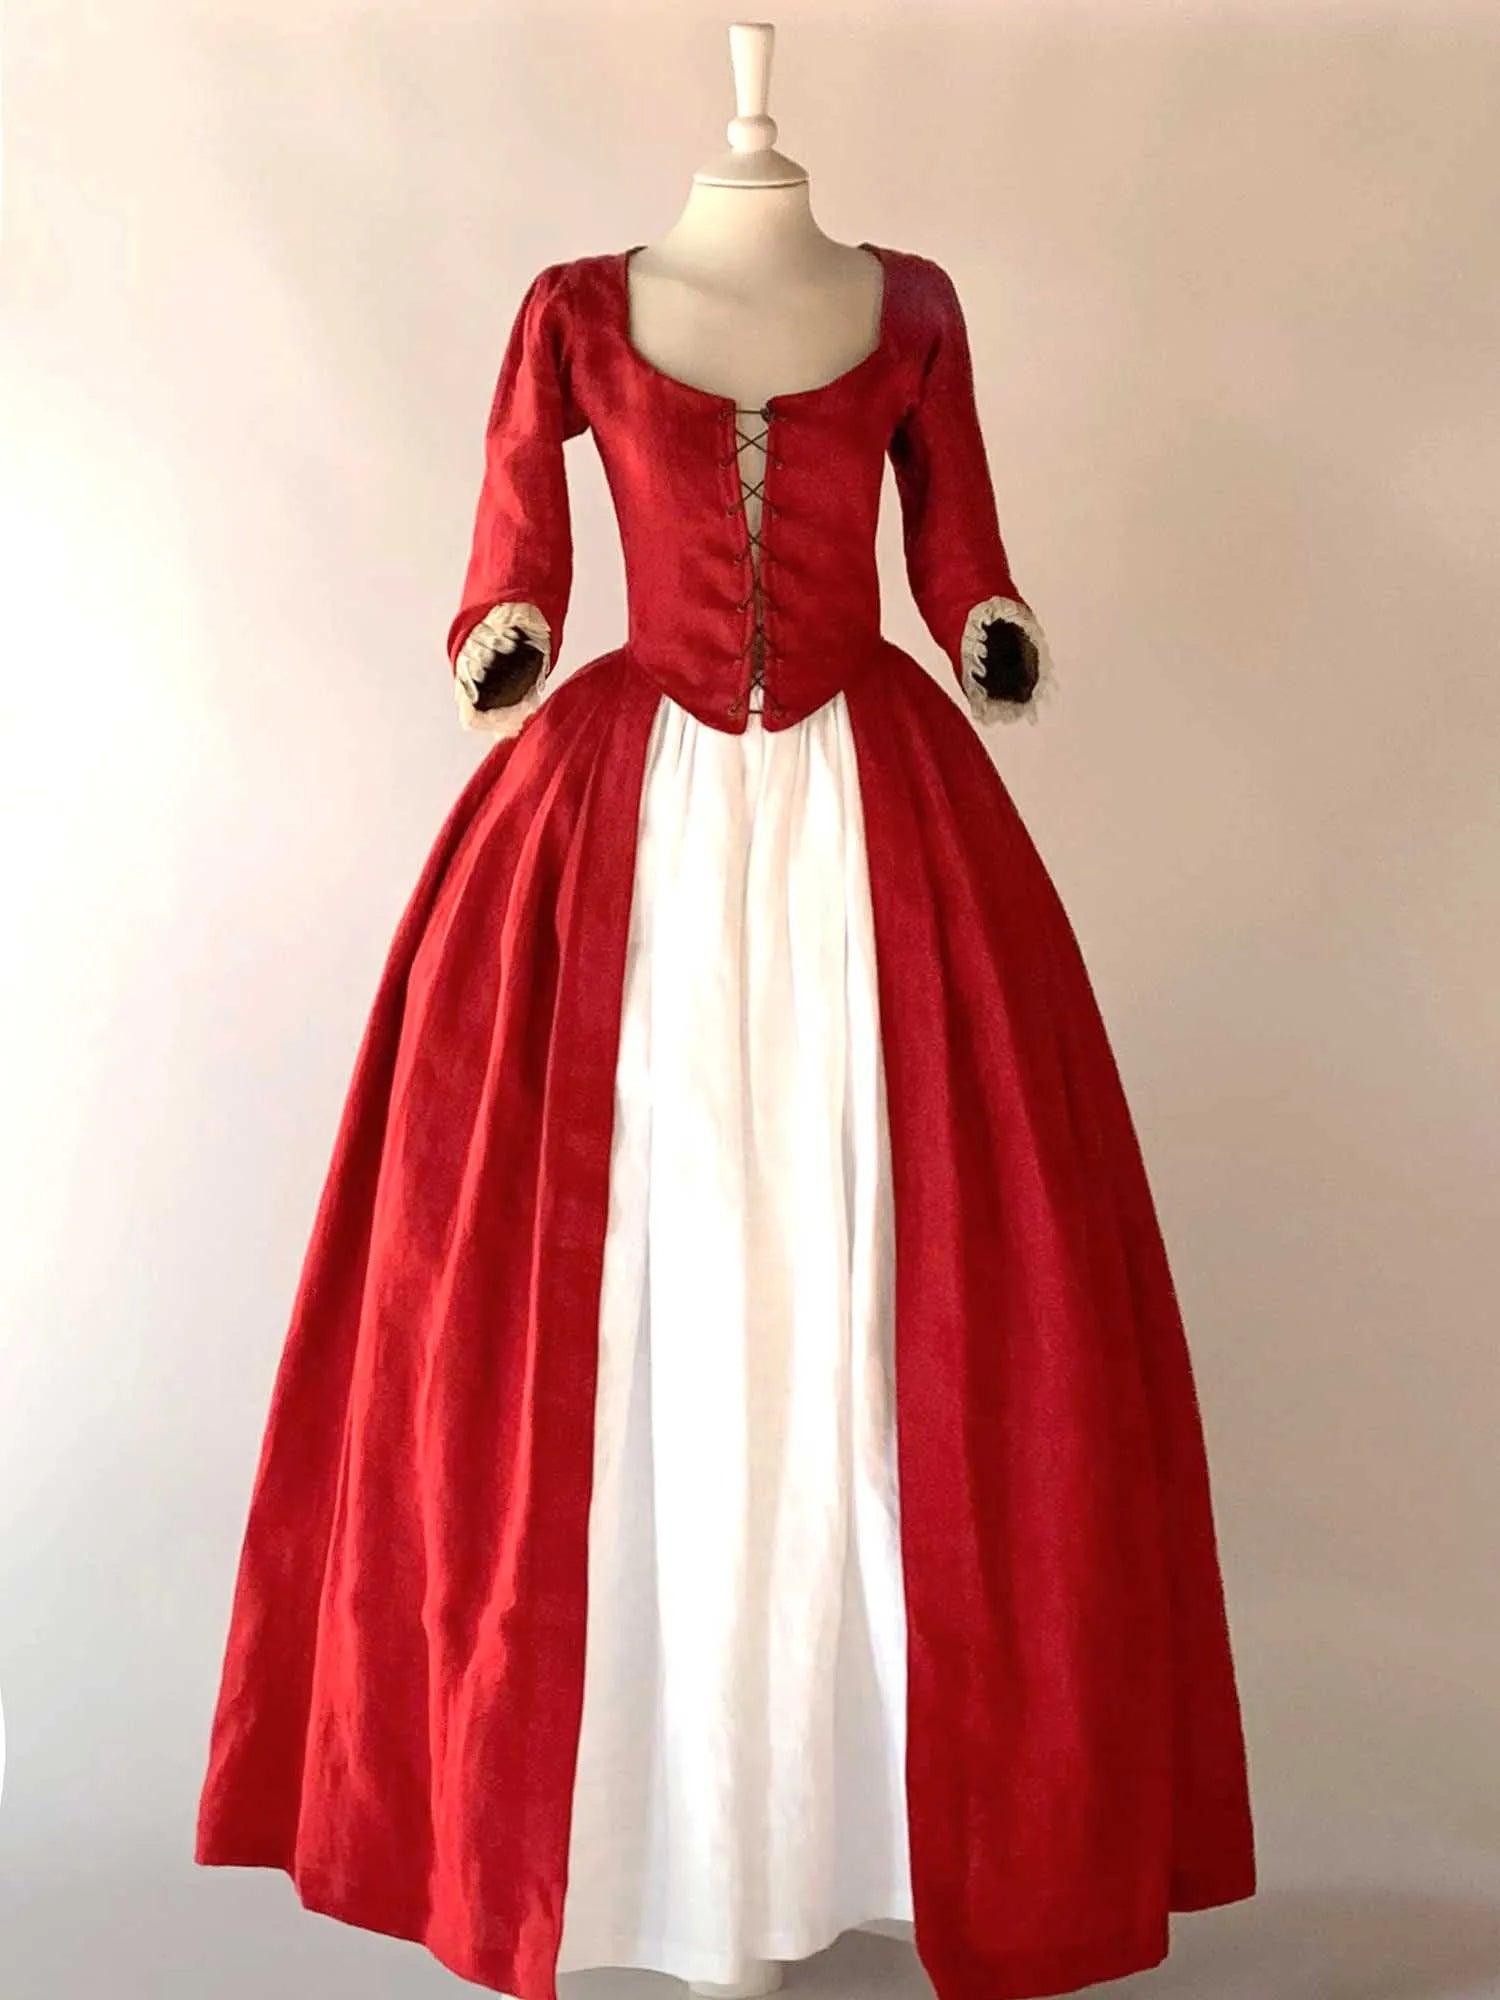 18th Century Overdress in Cherry Red Linen - Atelier Serraspina